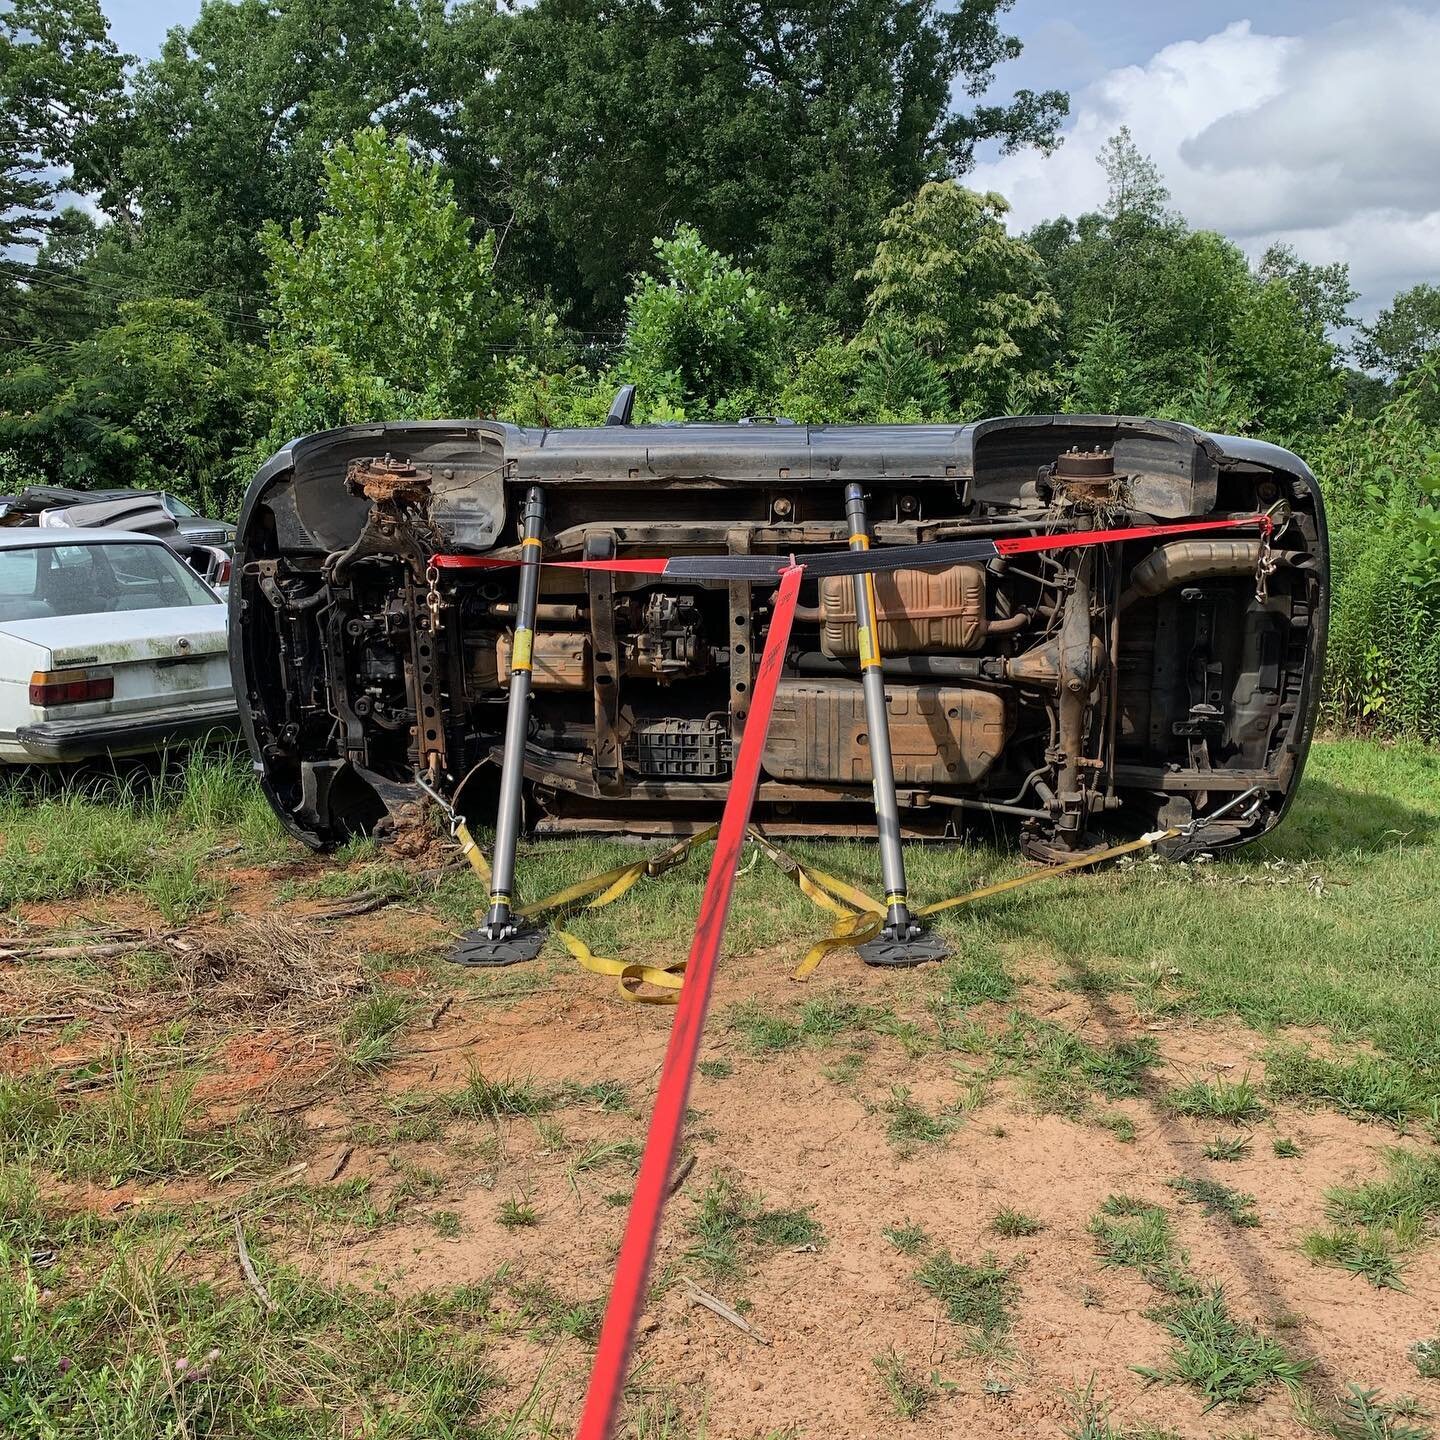 Over the past few days, firefighters trained on stabilizing a side resting vehicle. Stabilization was
performed using a tensioned back-tie technique, along with newly acquired straps made specifically for this. Firefighters also trained to controllab